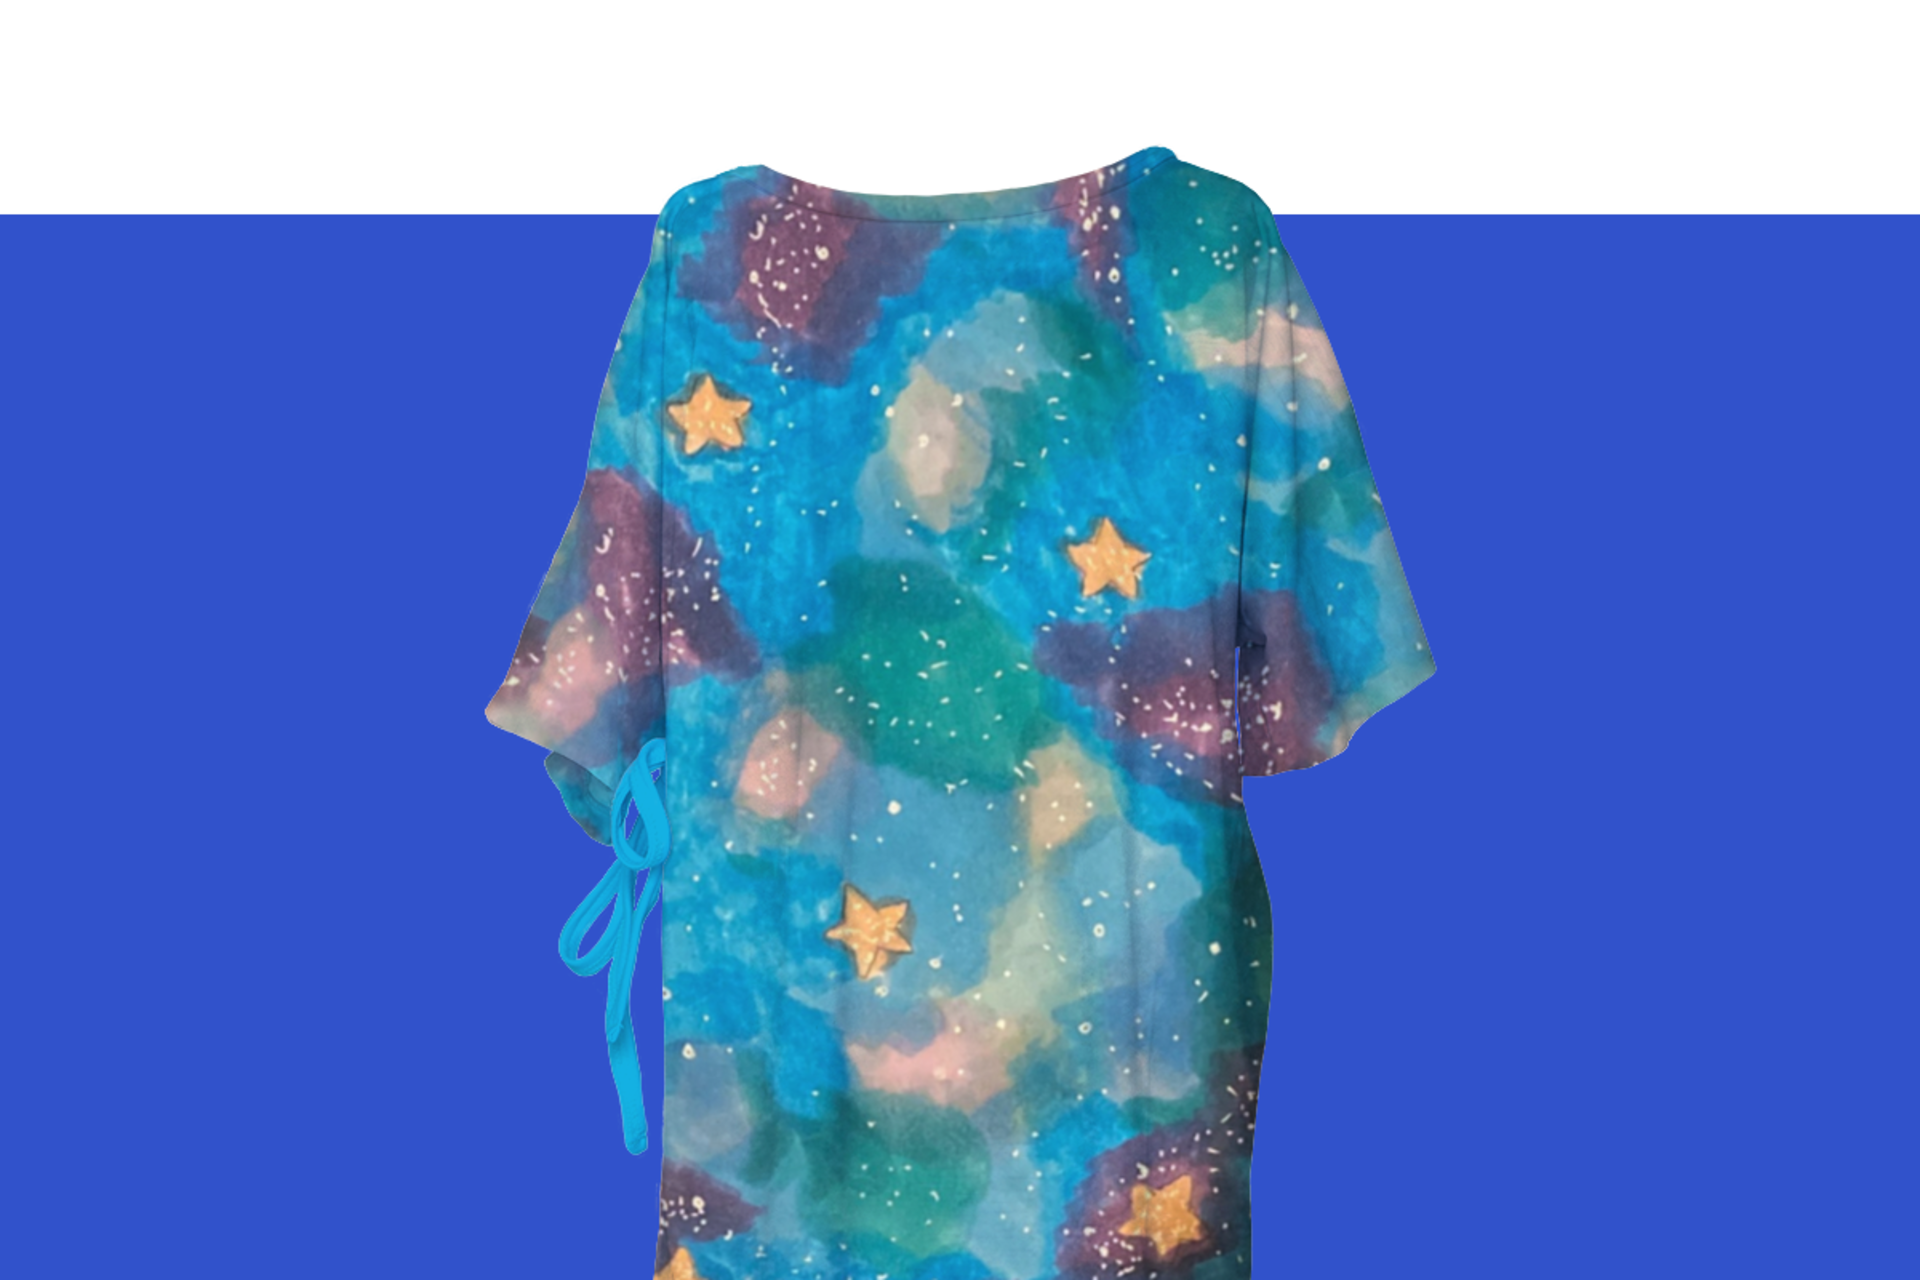 Hospital gown with a space and stars